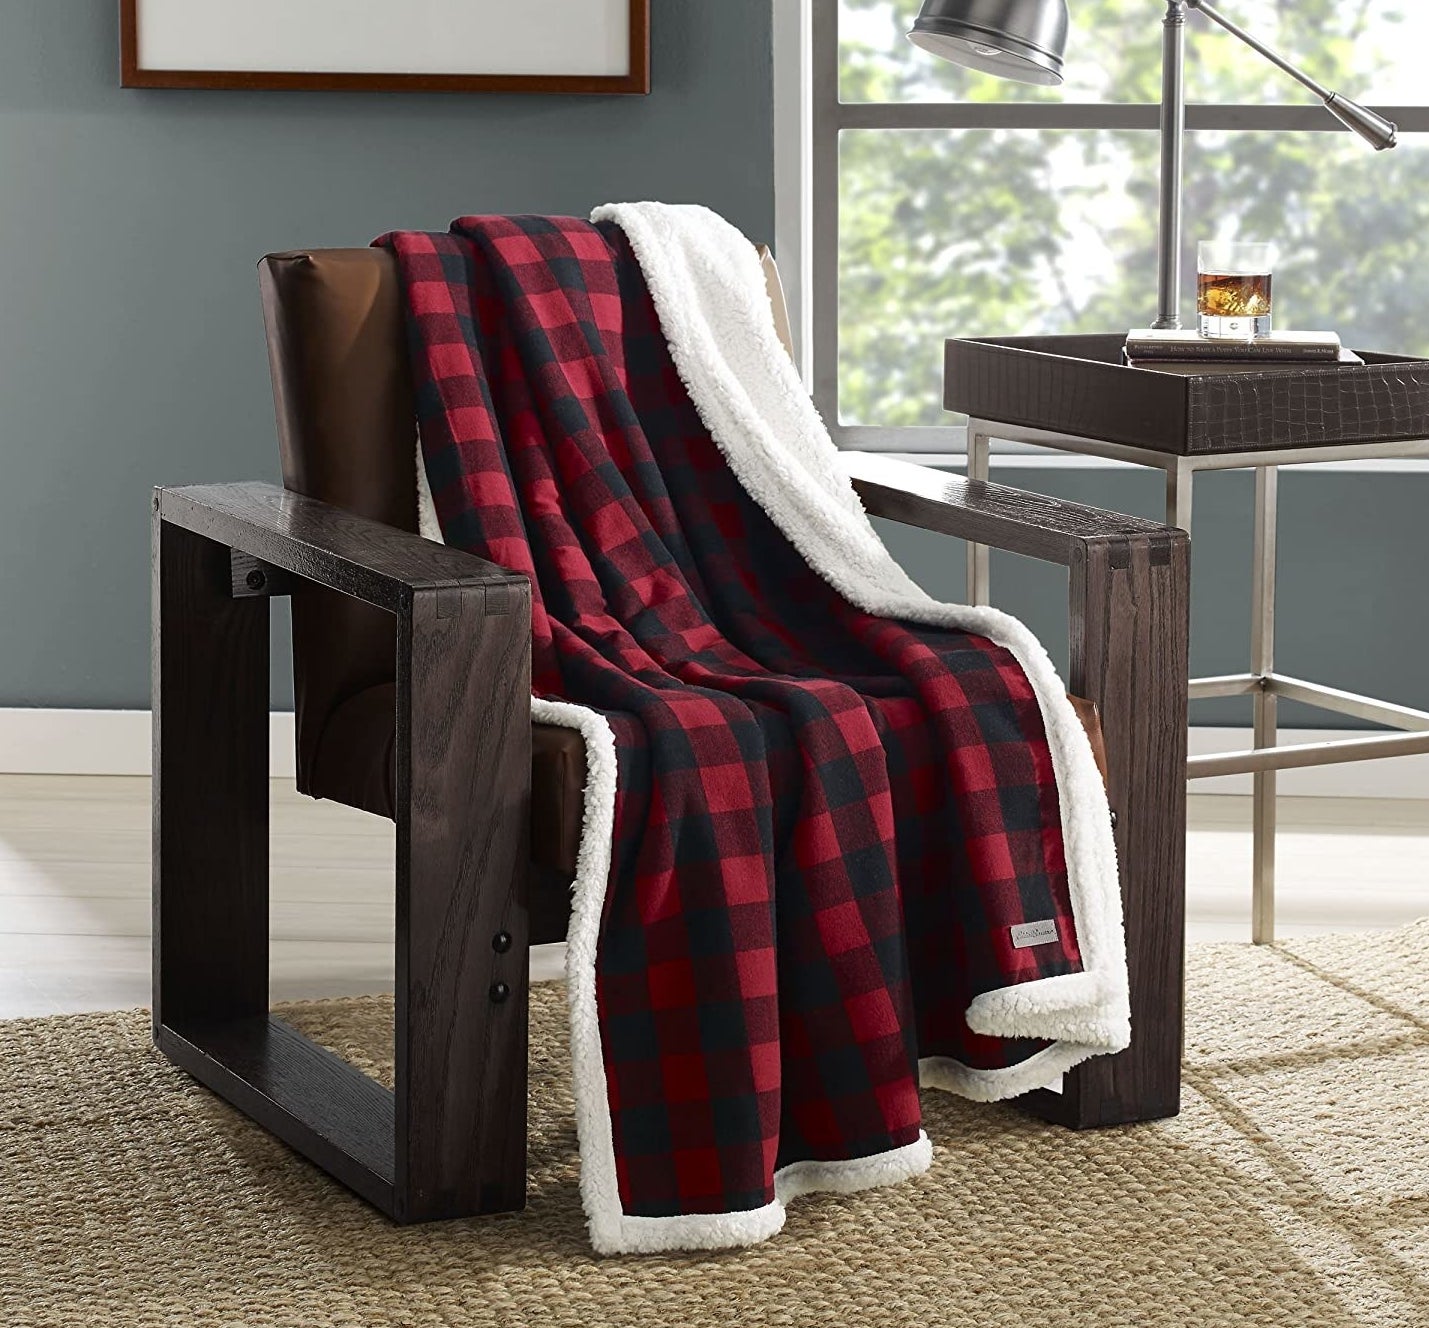 A cozy flannel blanket draping over a big chair